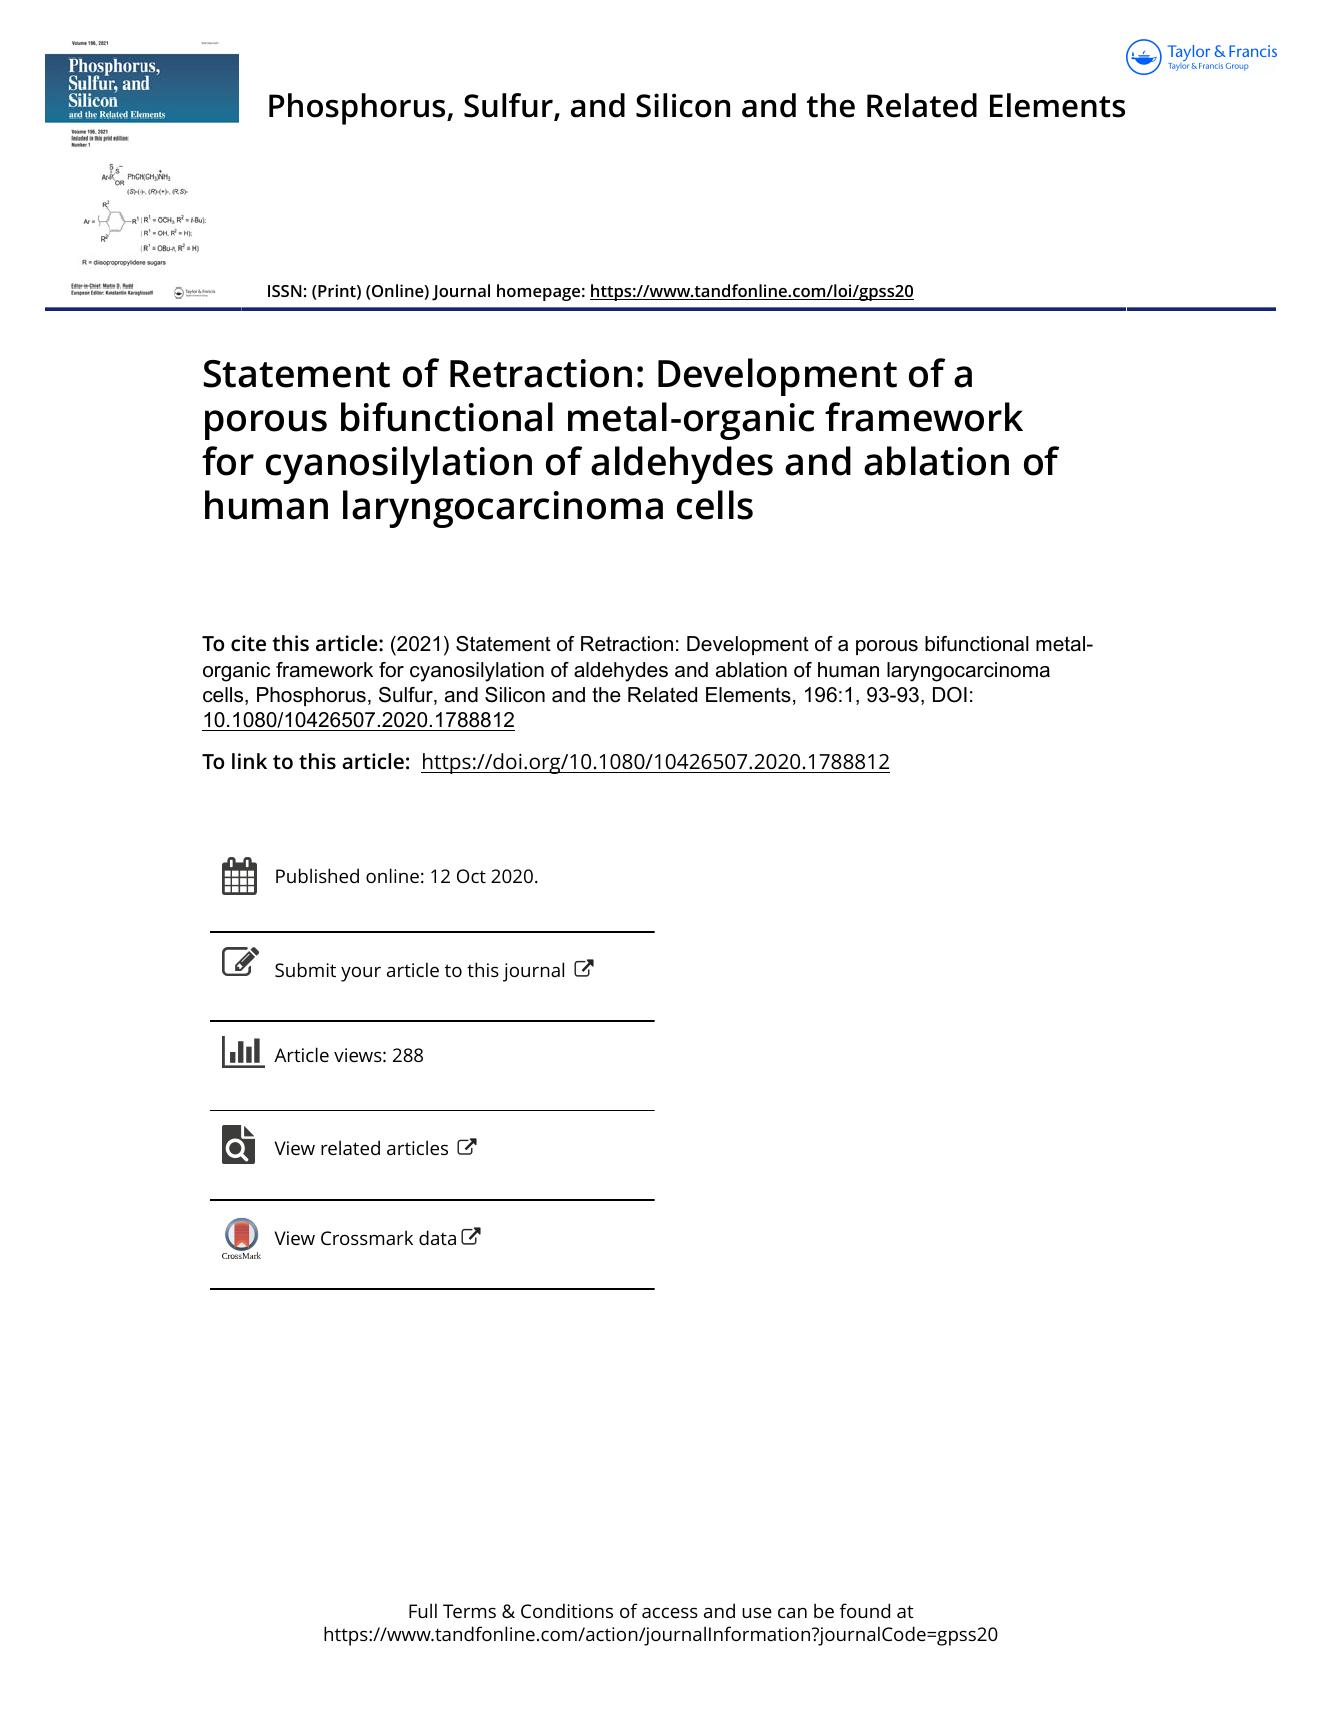 Statement of Retraction: Development of a porous bifunctional metal-organic framework for cyanosilylation of aldehydes and ablation of human laryngocarcinoma cells by Unknown